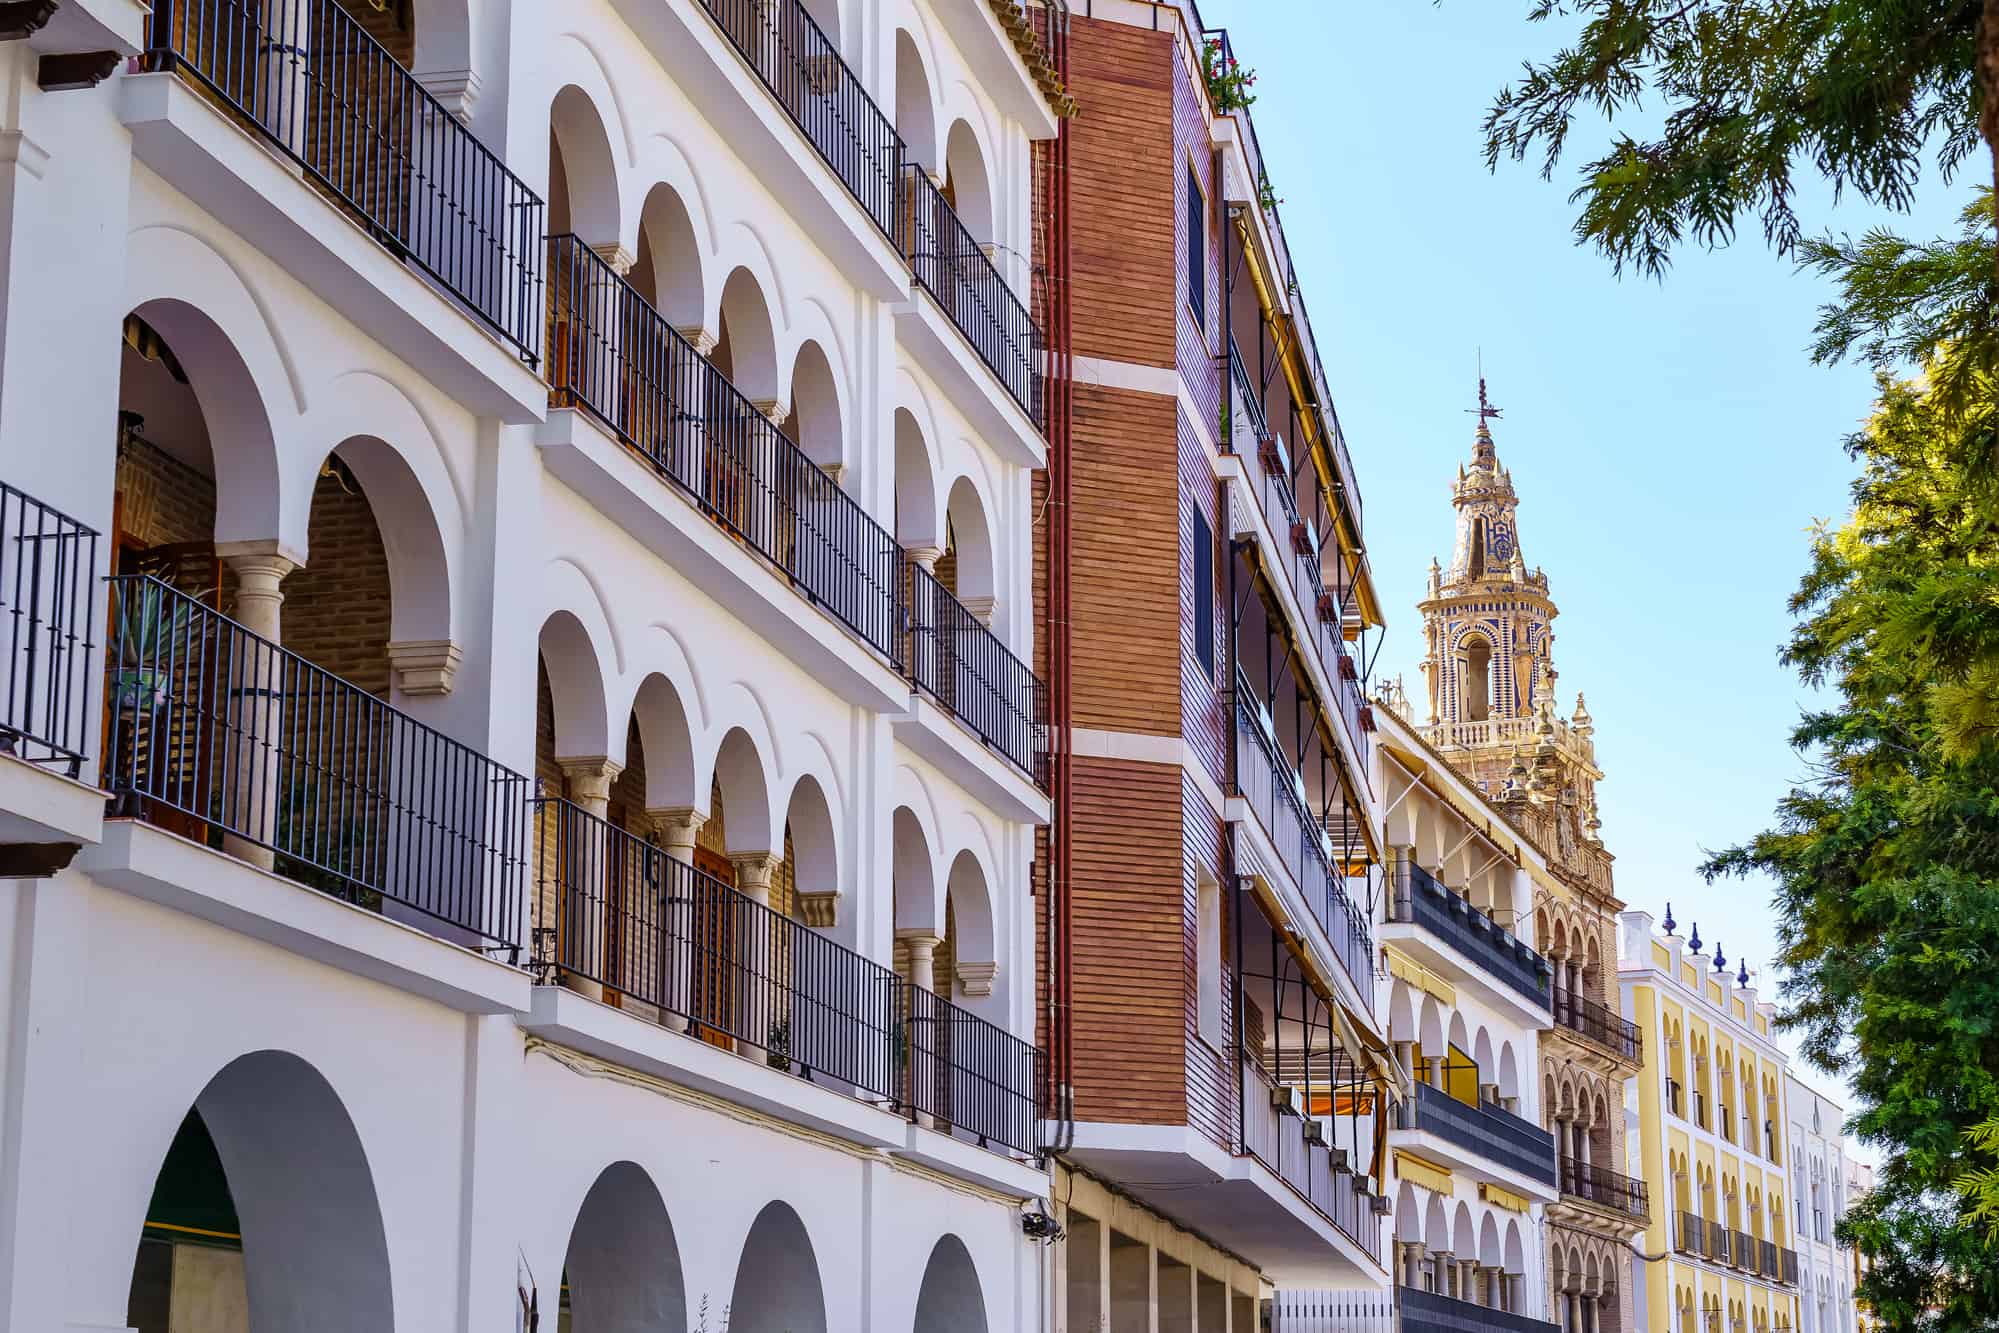 Picturesque buildings with medieval church tower, Seville